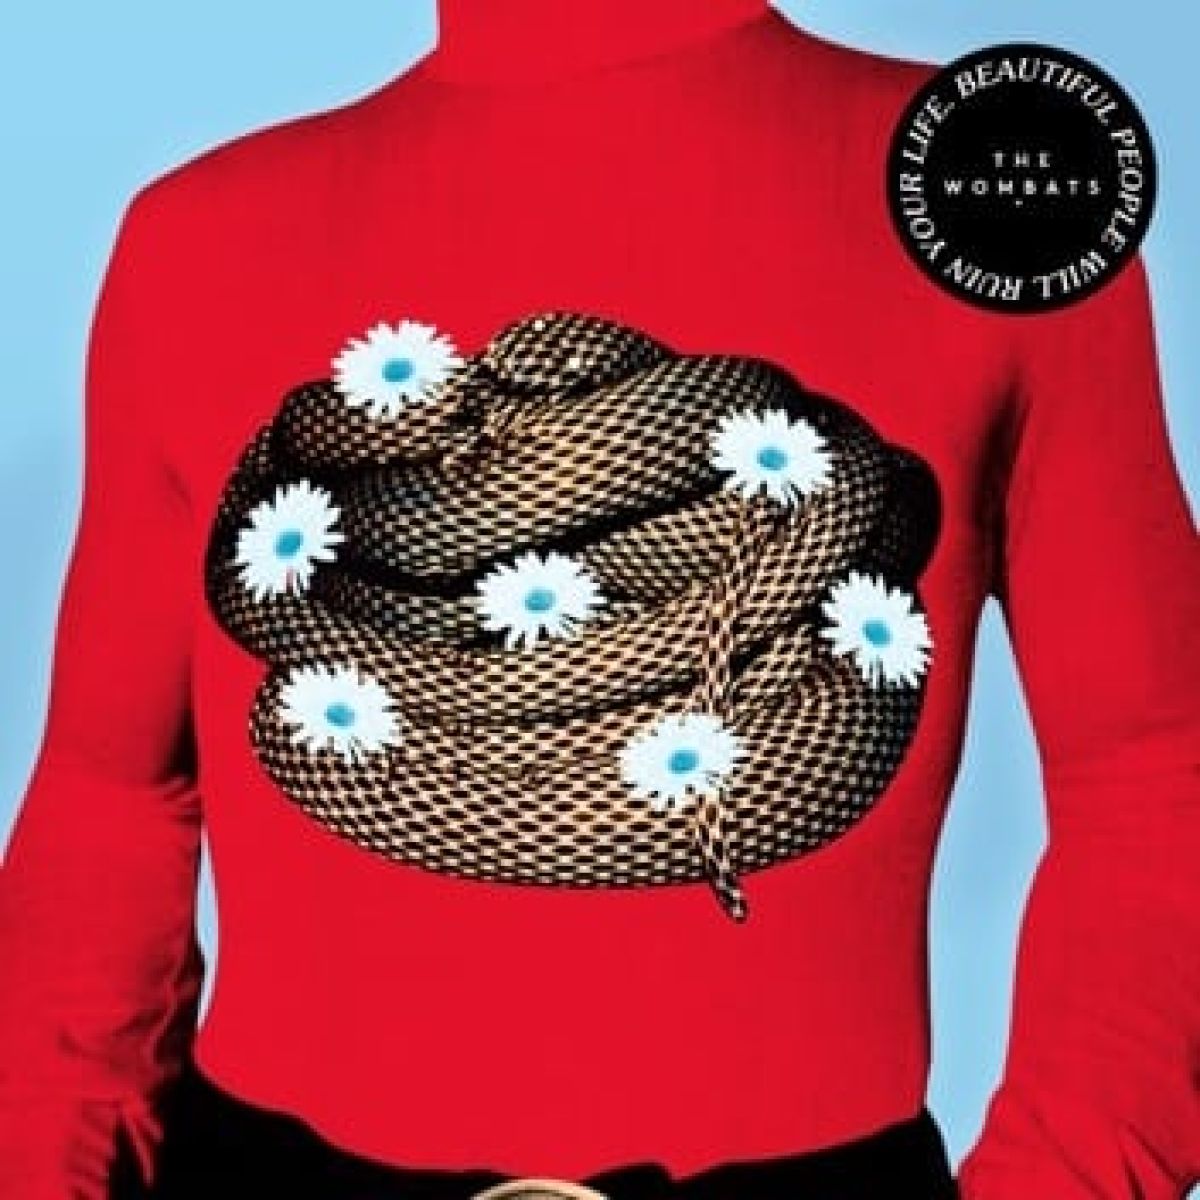 Review: The Wombats – Beautiful People Will Ruin Your Life